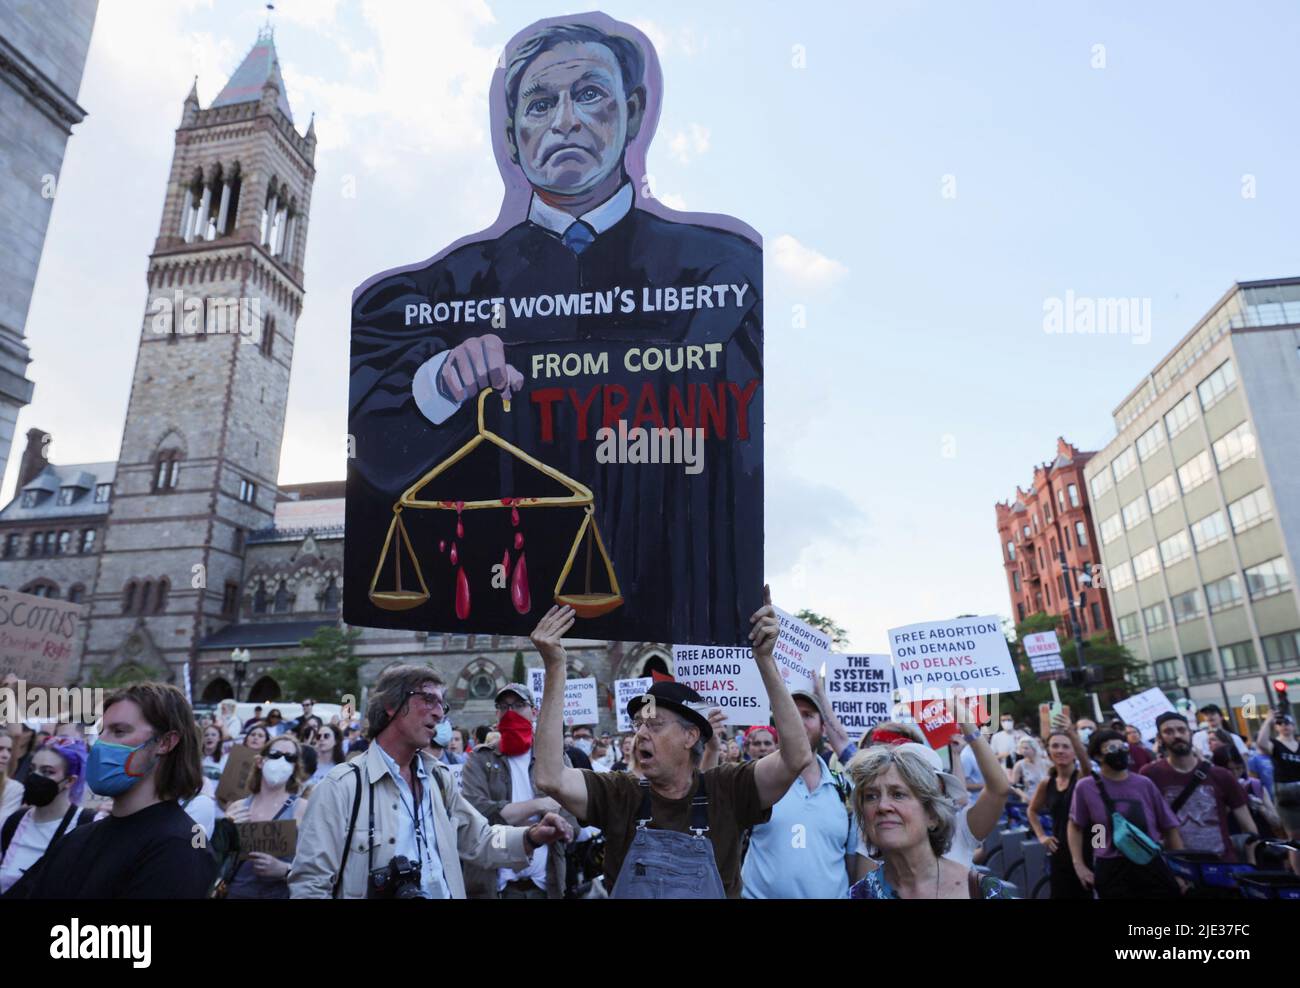 Abortion rights protesters demonstrate after the U.S. Supreme Court ruled in the Dobbs v Women’s Health Organization abortion case, overturning the landmark Roe v Wade abortion decision in Boston, Massachusetts, U.S., June 24, 2022. REUTERS/Brian Snyder Stock Photo